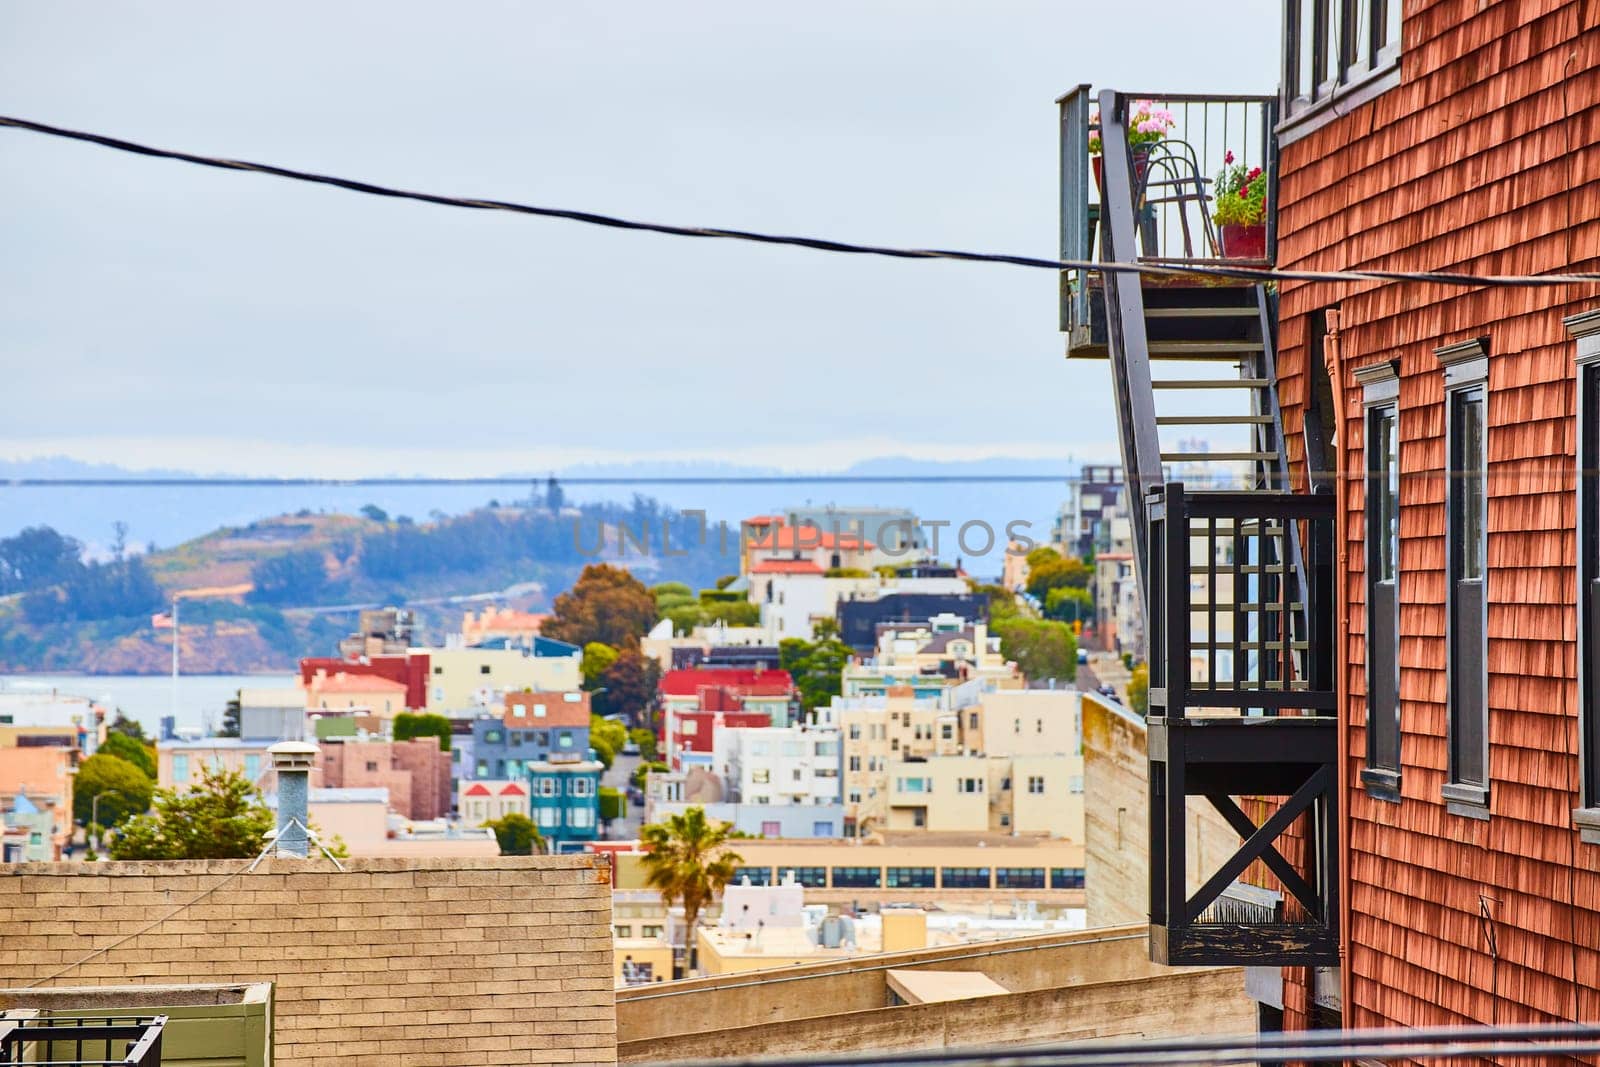 Image of Side of reddish brown building with black stairs and patio overlooking city buildings in California